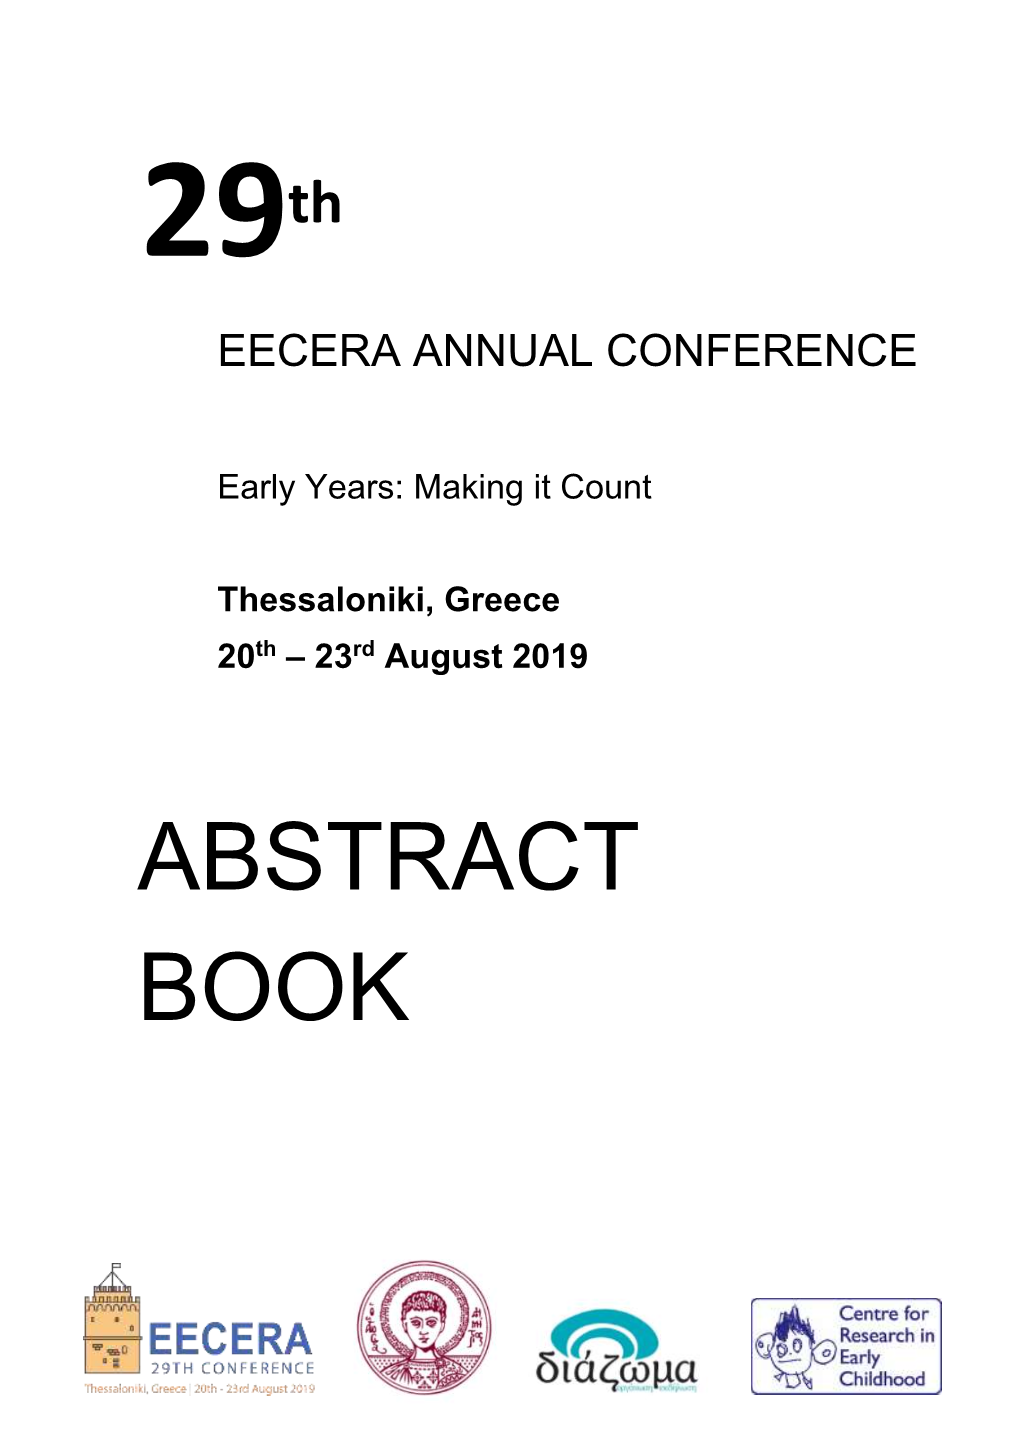 Abstract Book (Pdf)